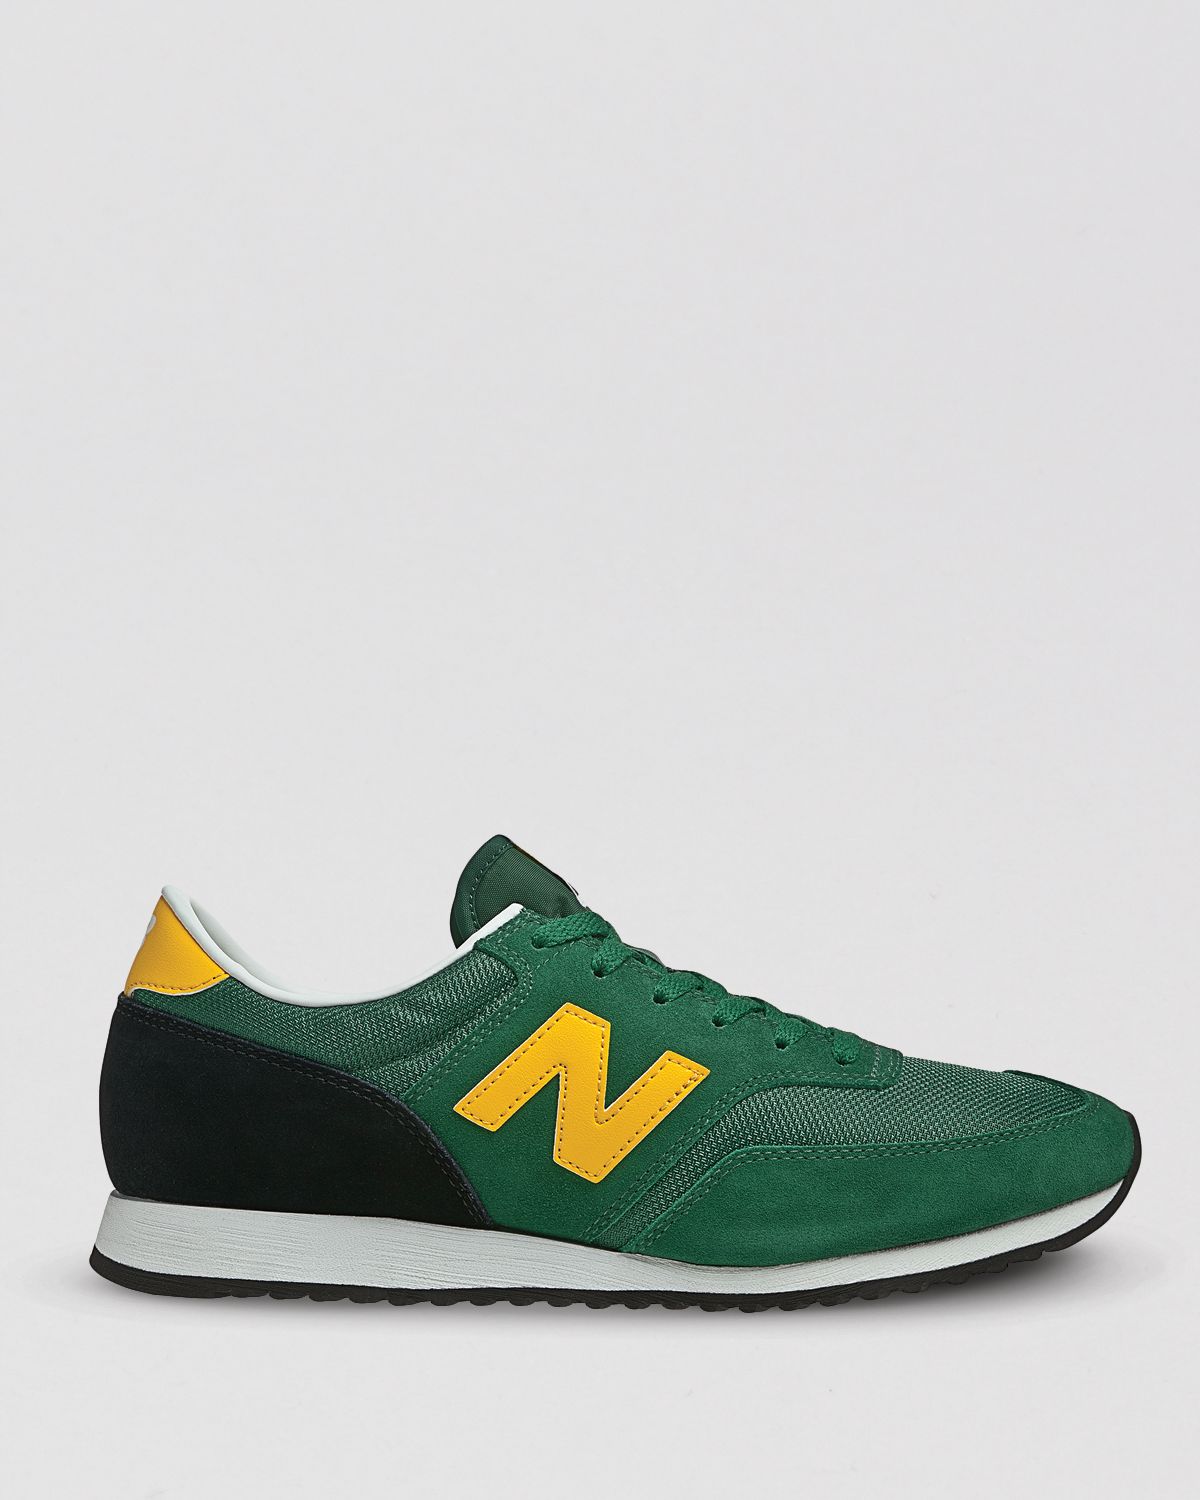 New Balance 620 Vintage Classic Sneakers in Green/Yellow (Green ...